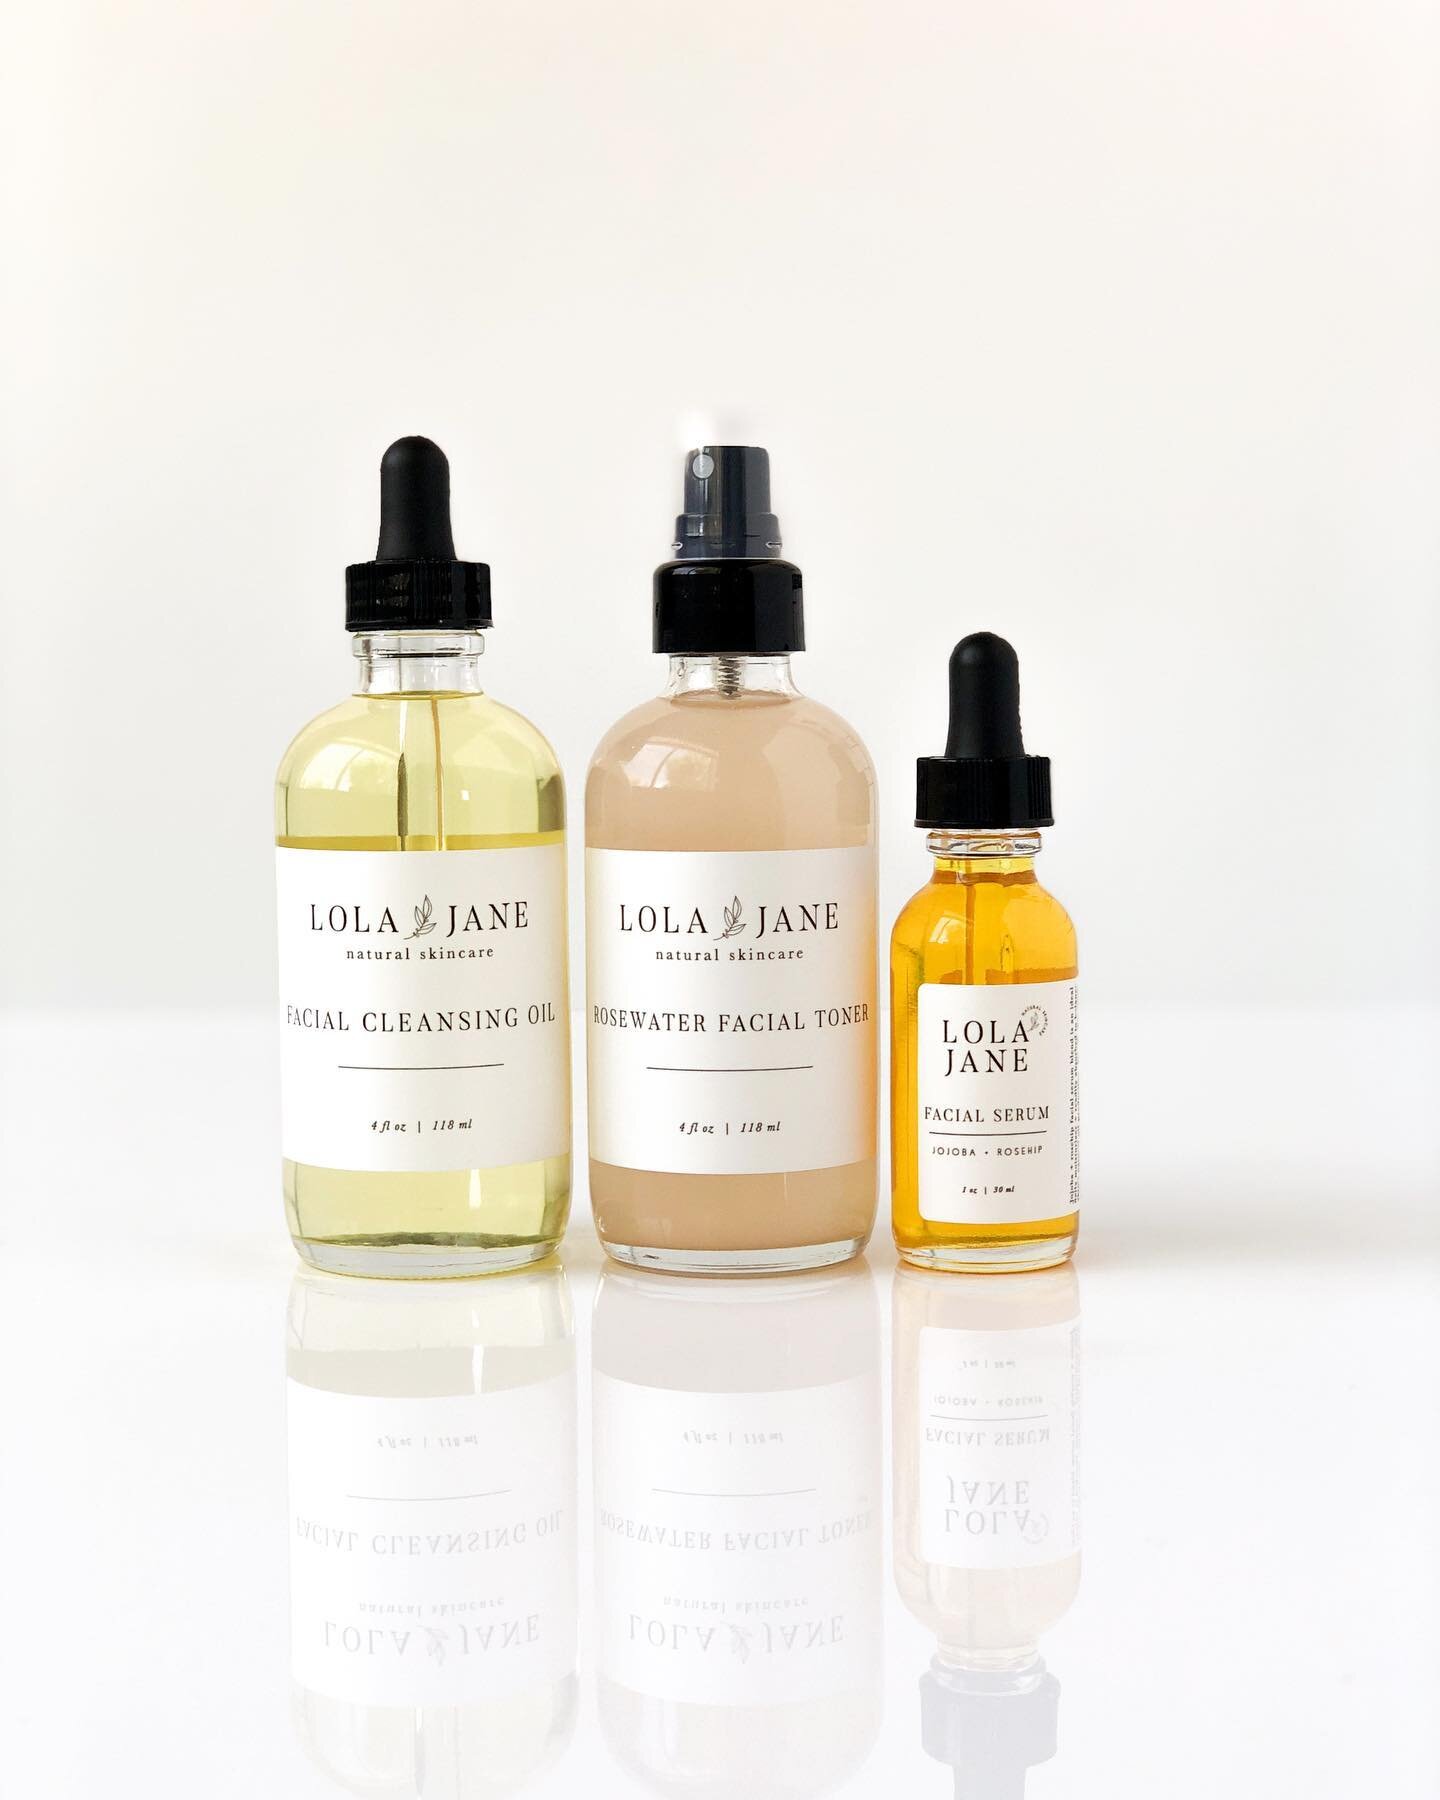 This is minimalist skincare.
remove + cleanse
balance + tone
nourish + hydrate
⠀
These 3 can do it all and judging by our last post, they&rsquo;re you&rsquo;re favorites too! Tap to view bundle. 🌿